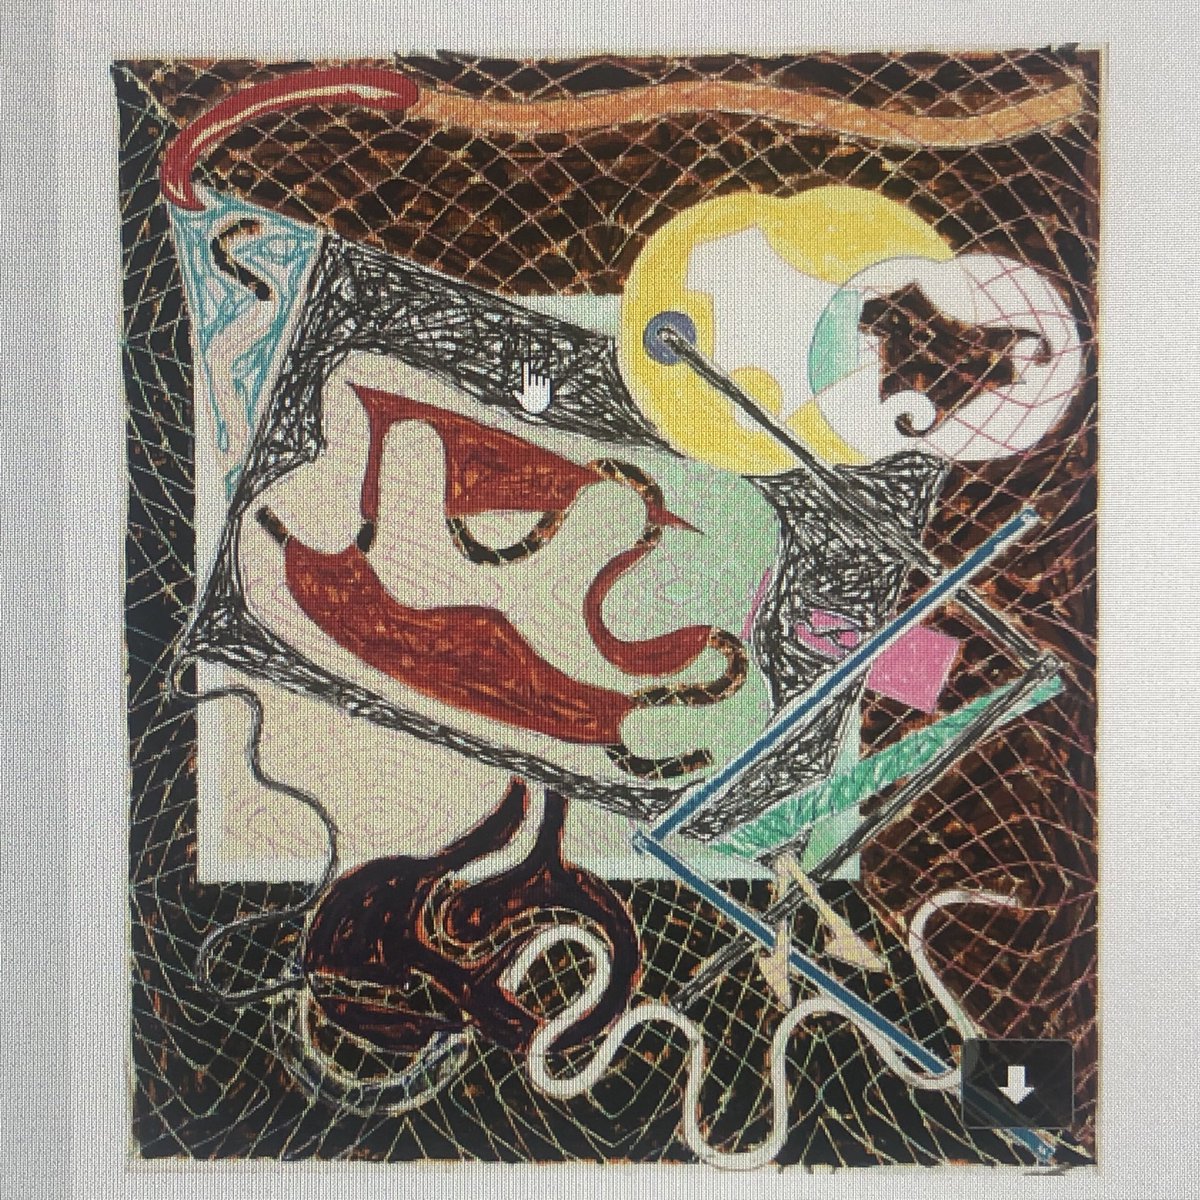 This 1982 print, ‘Shards III’ by Frank Stella evokes. some of Stuart Davis’s Gloucester paintings of the 1930s, right down to the fishing net.